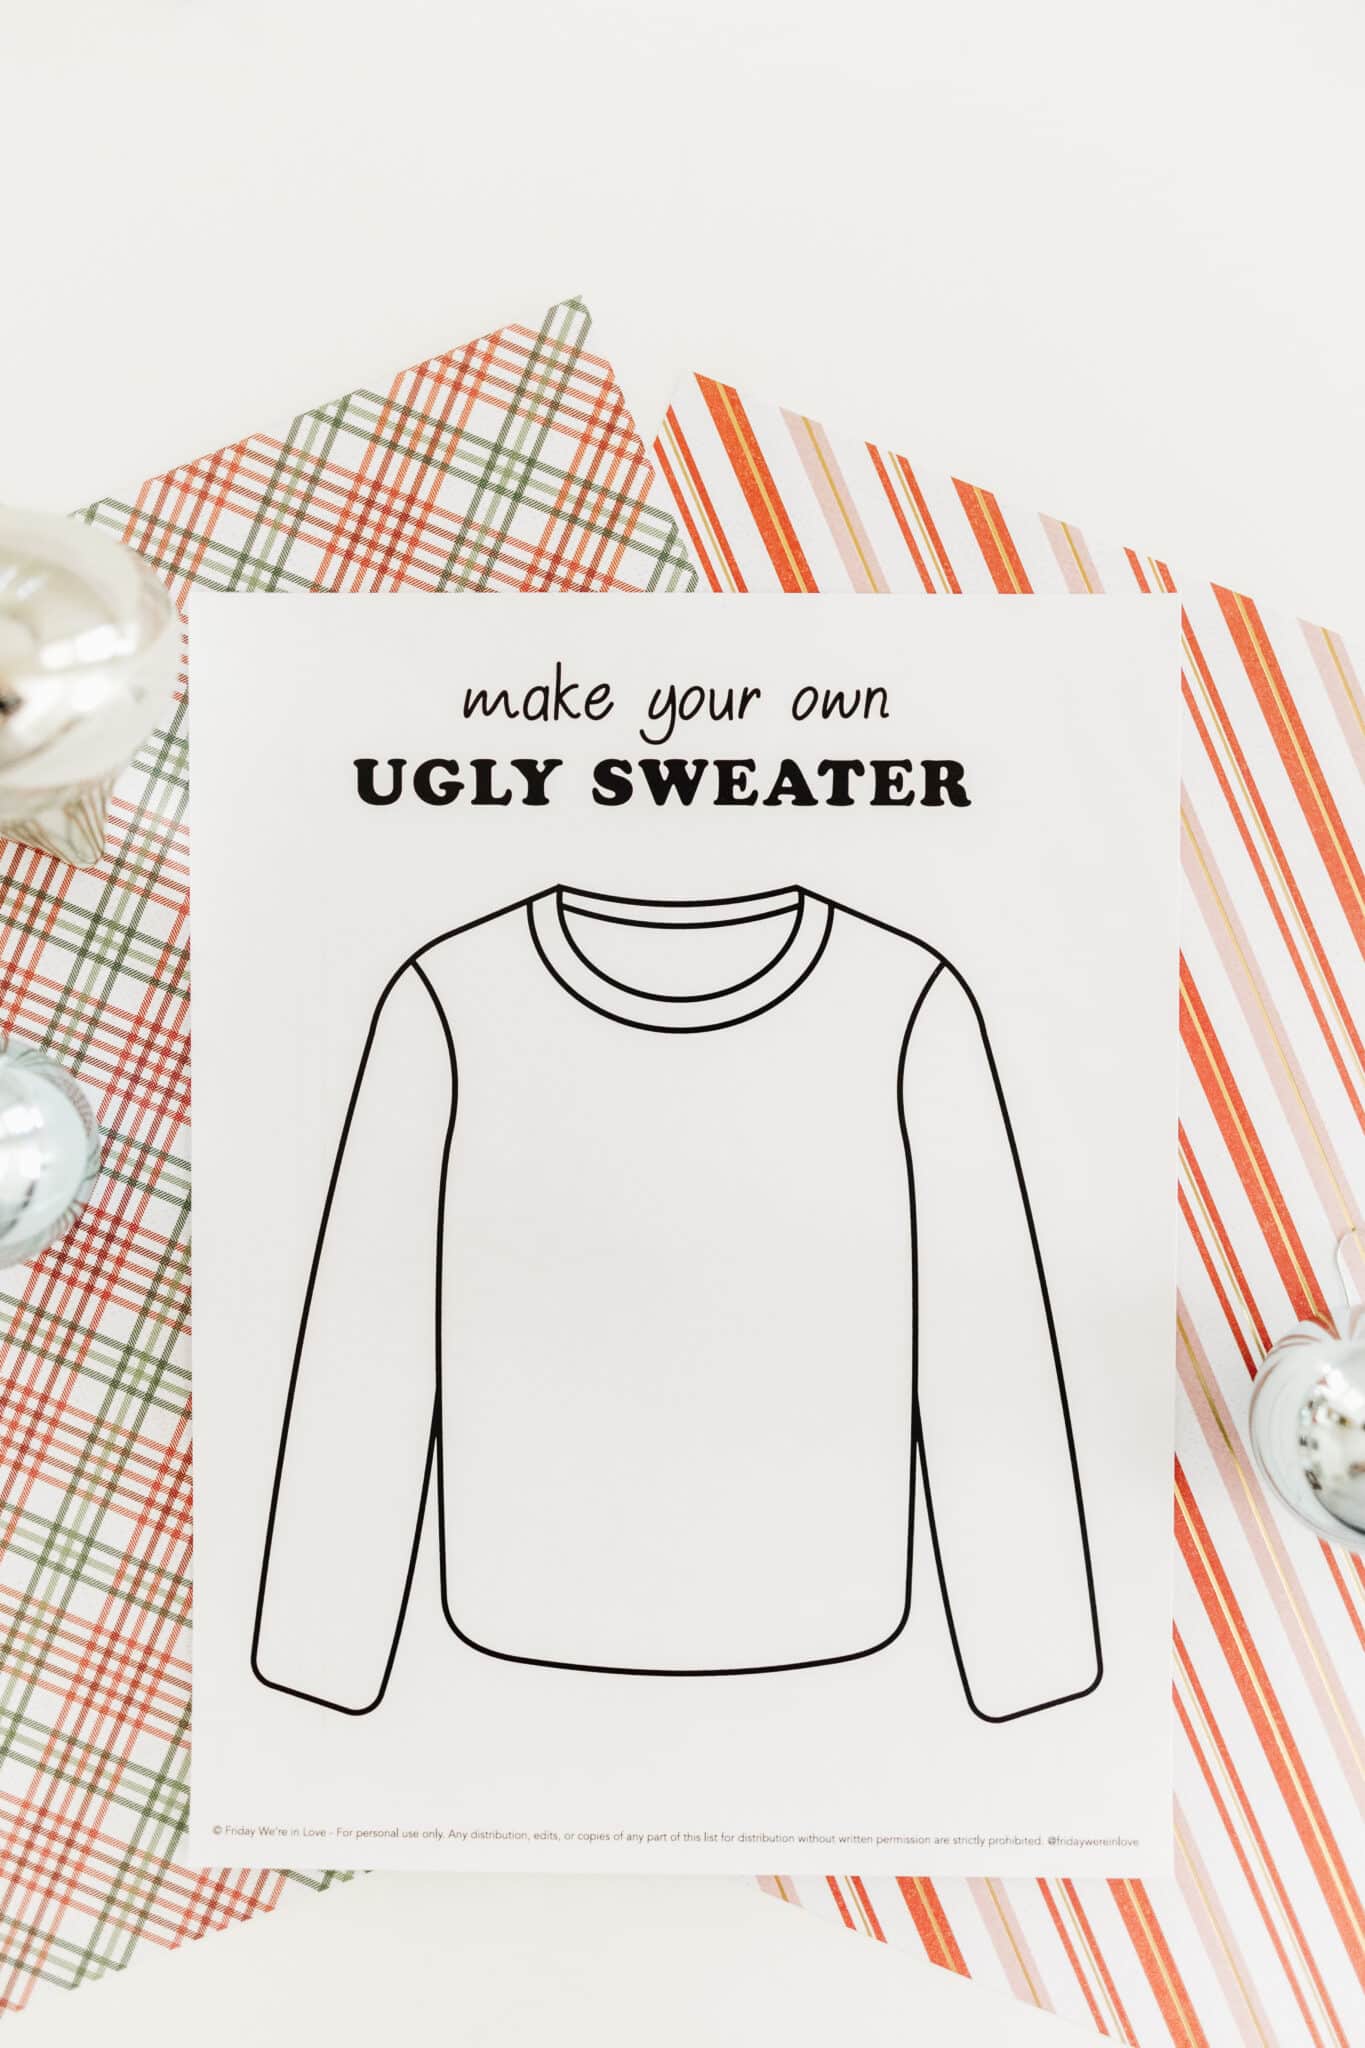 Ugly sweater template free printable download on Christmas wrapping paper. 